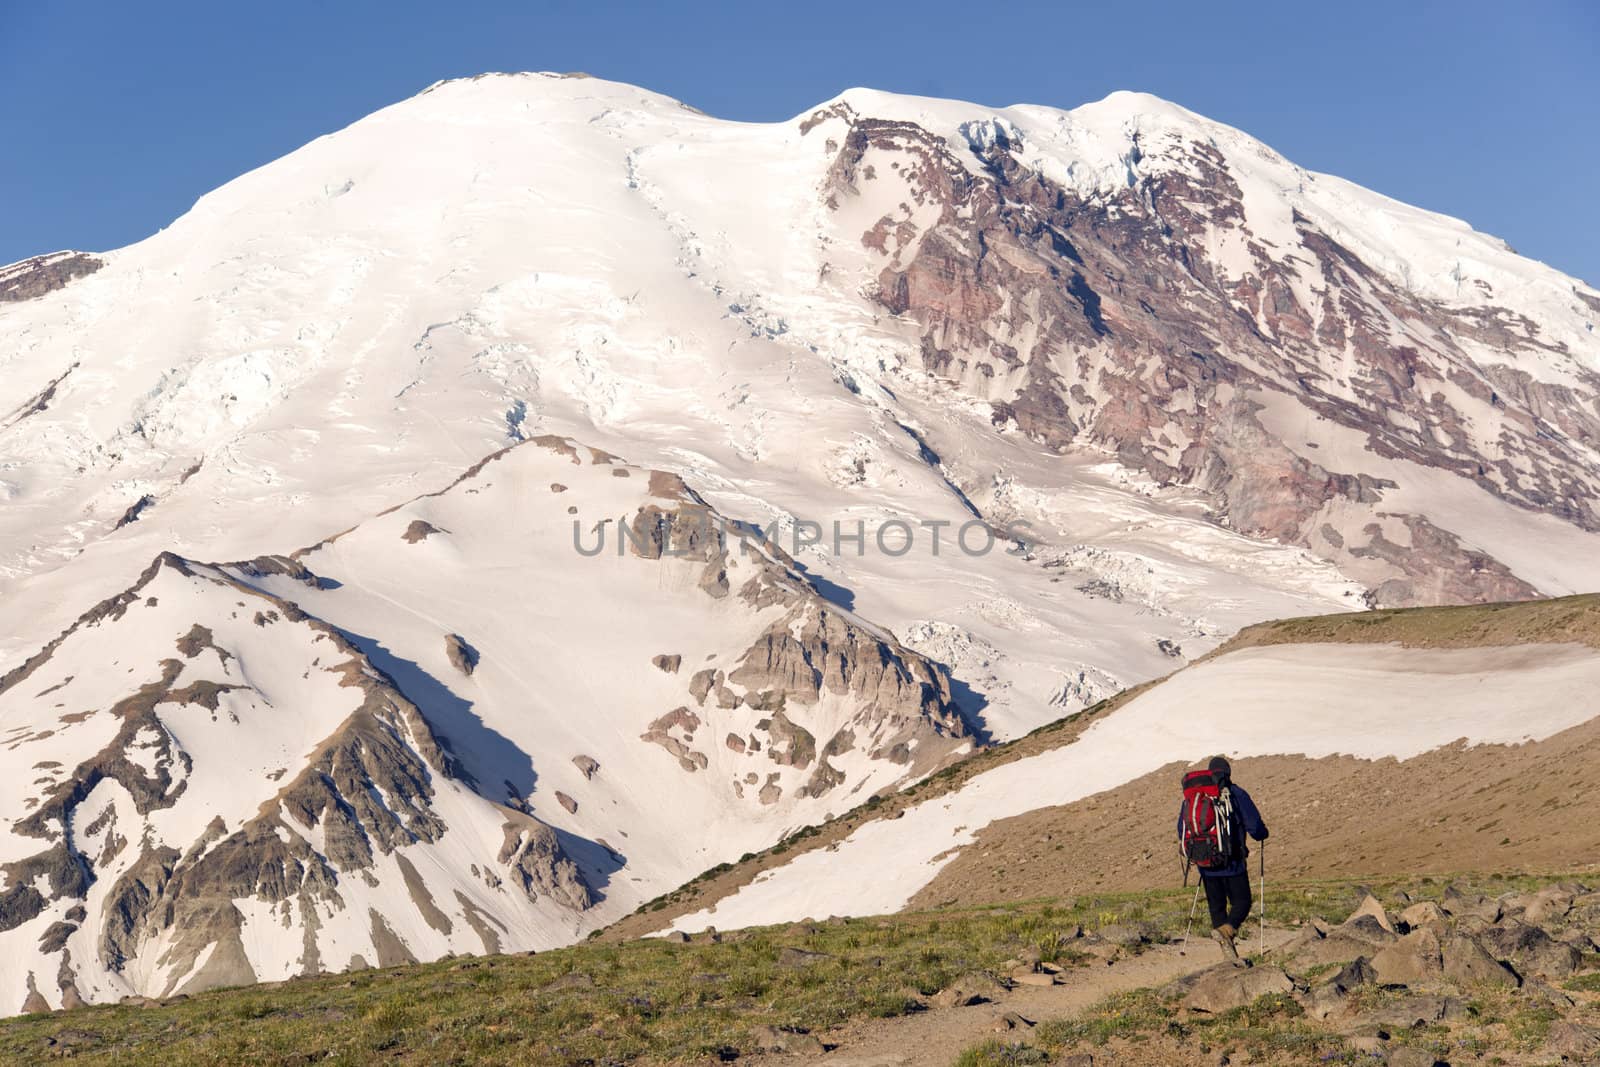 Mt. Rainier and Hiker by ChrisBoswell